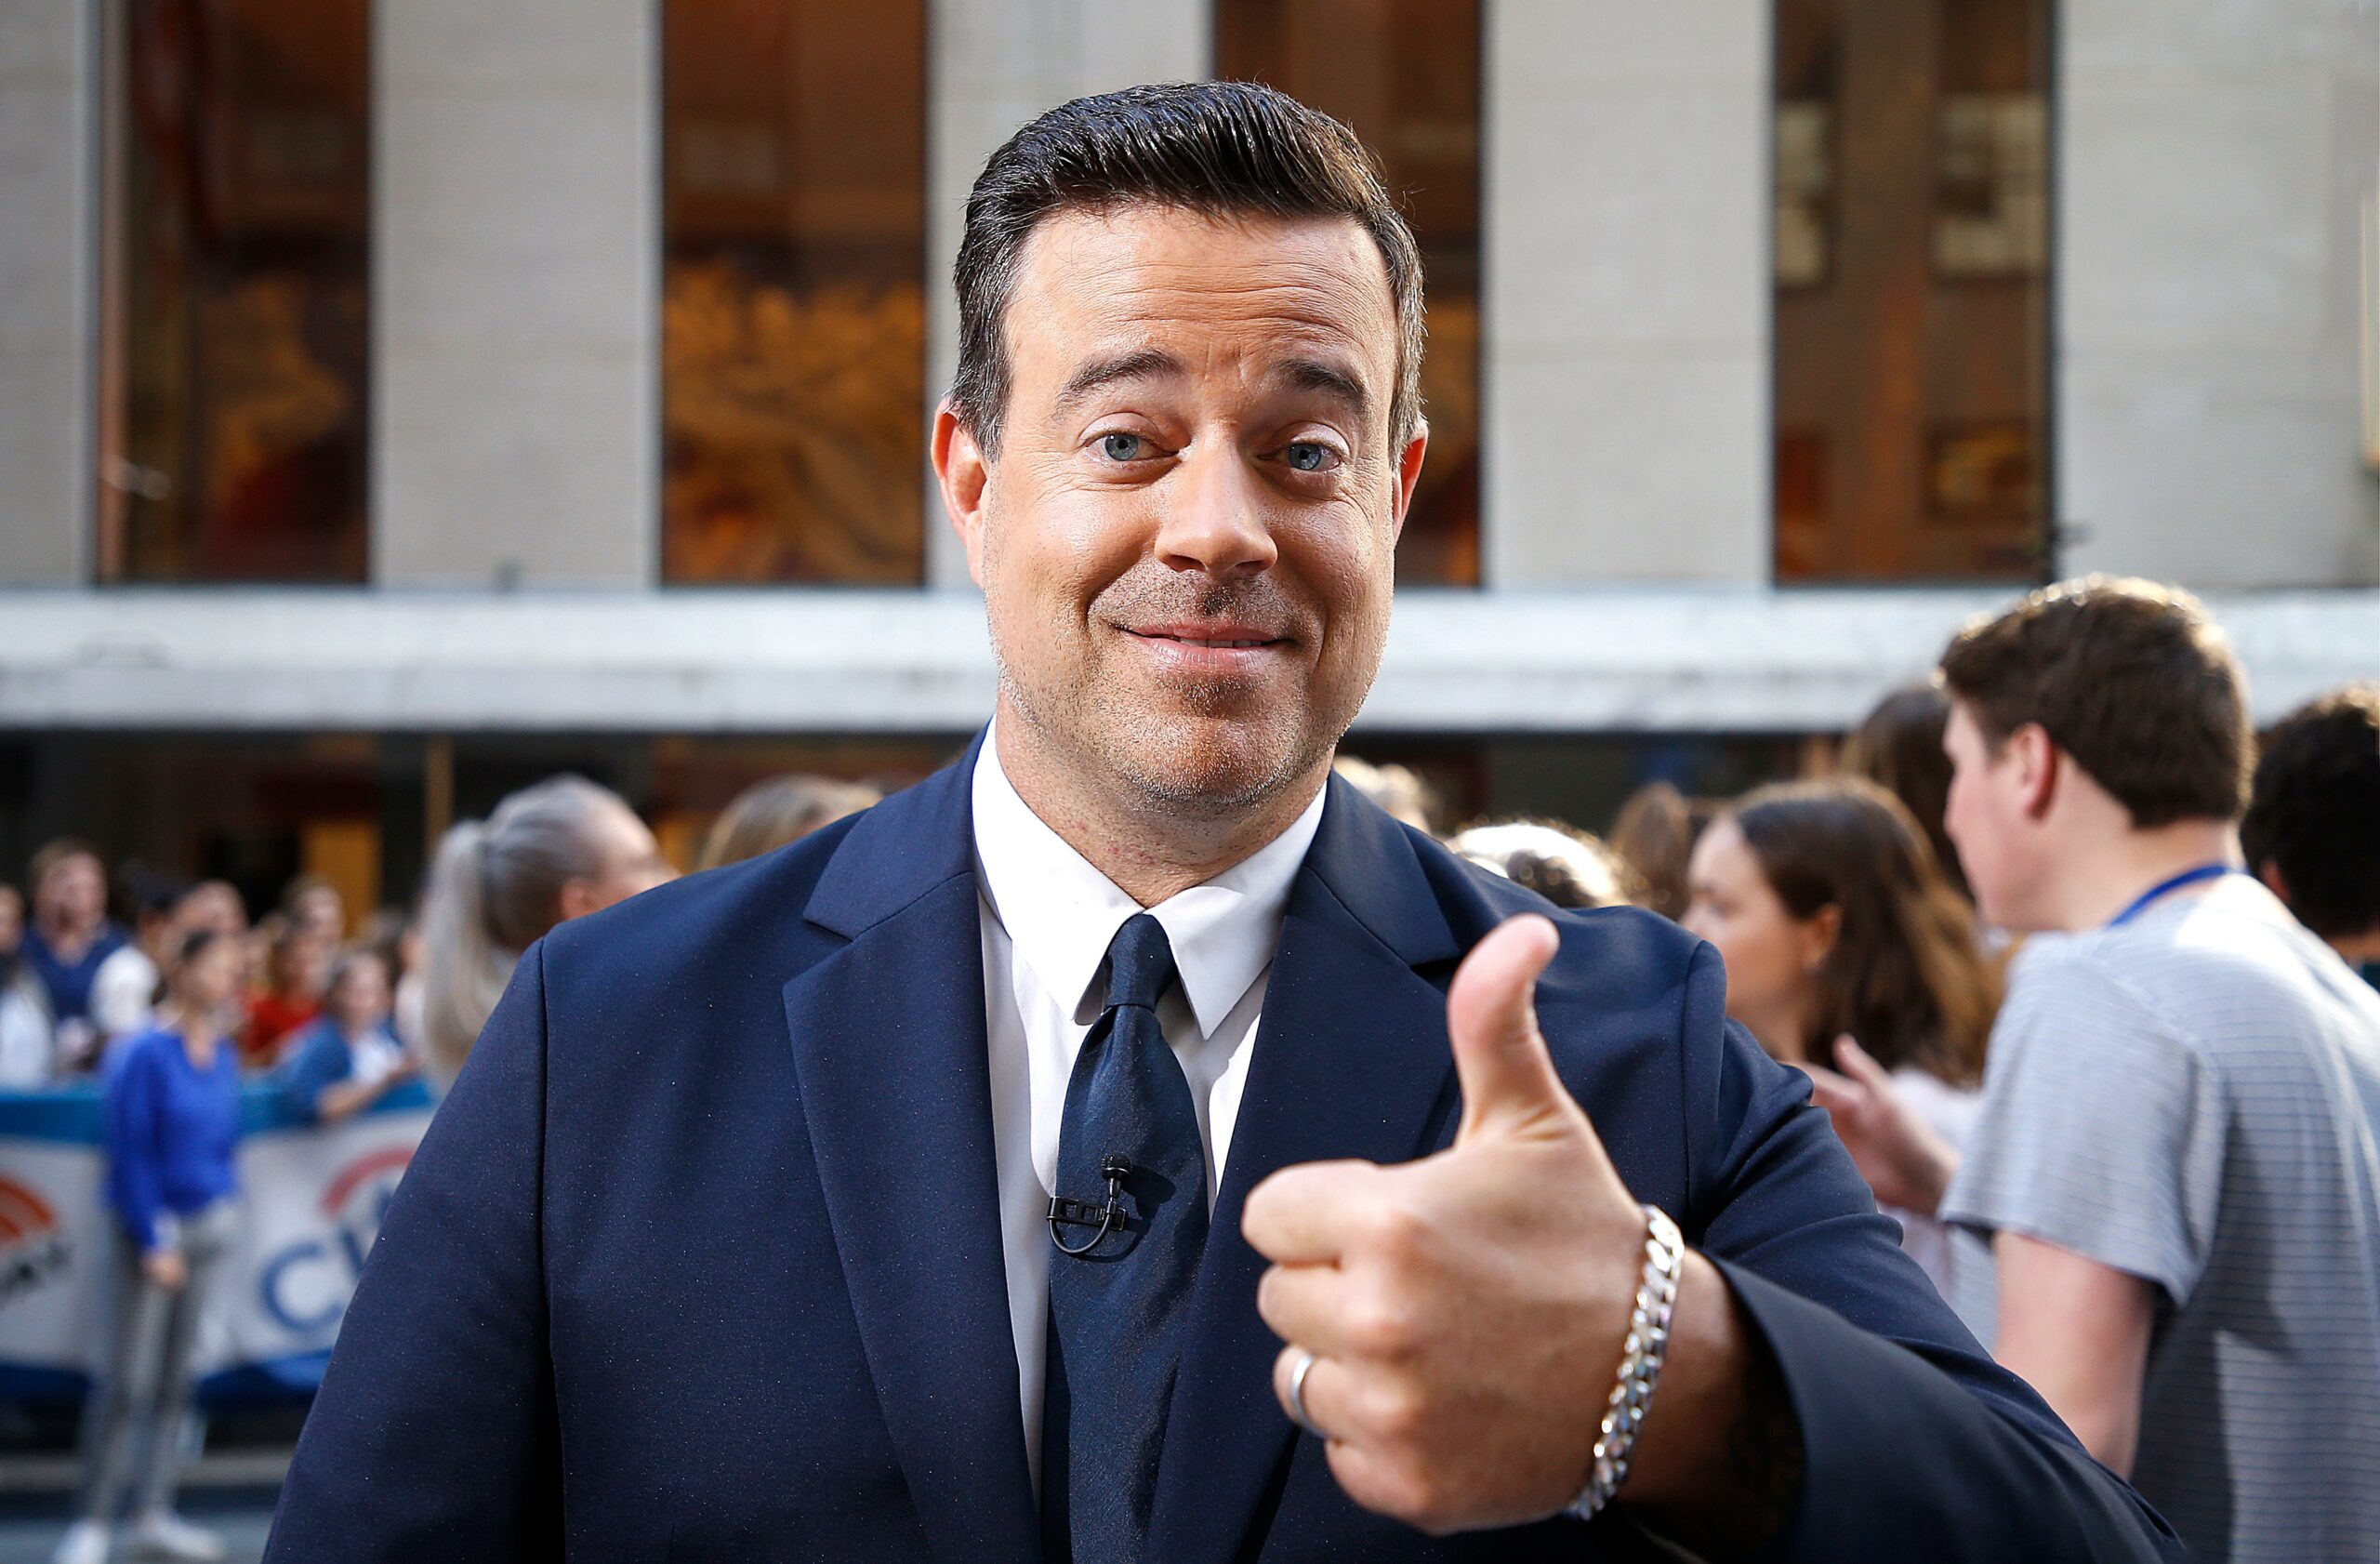 What is Carson Daly salary?